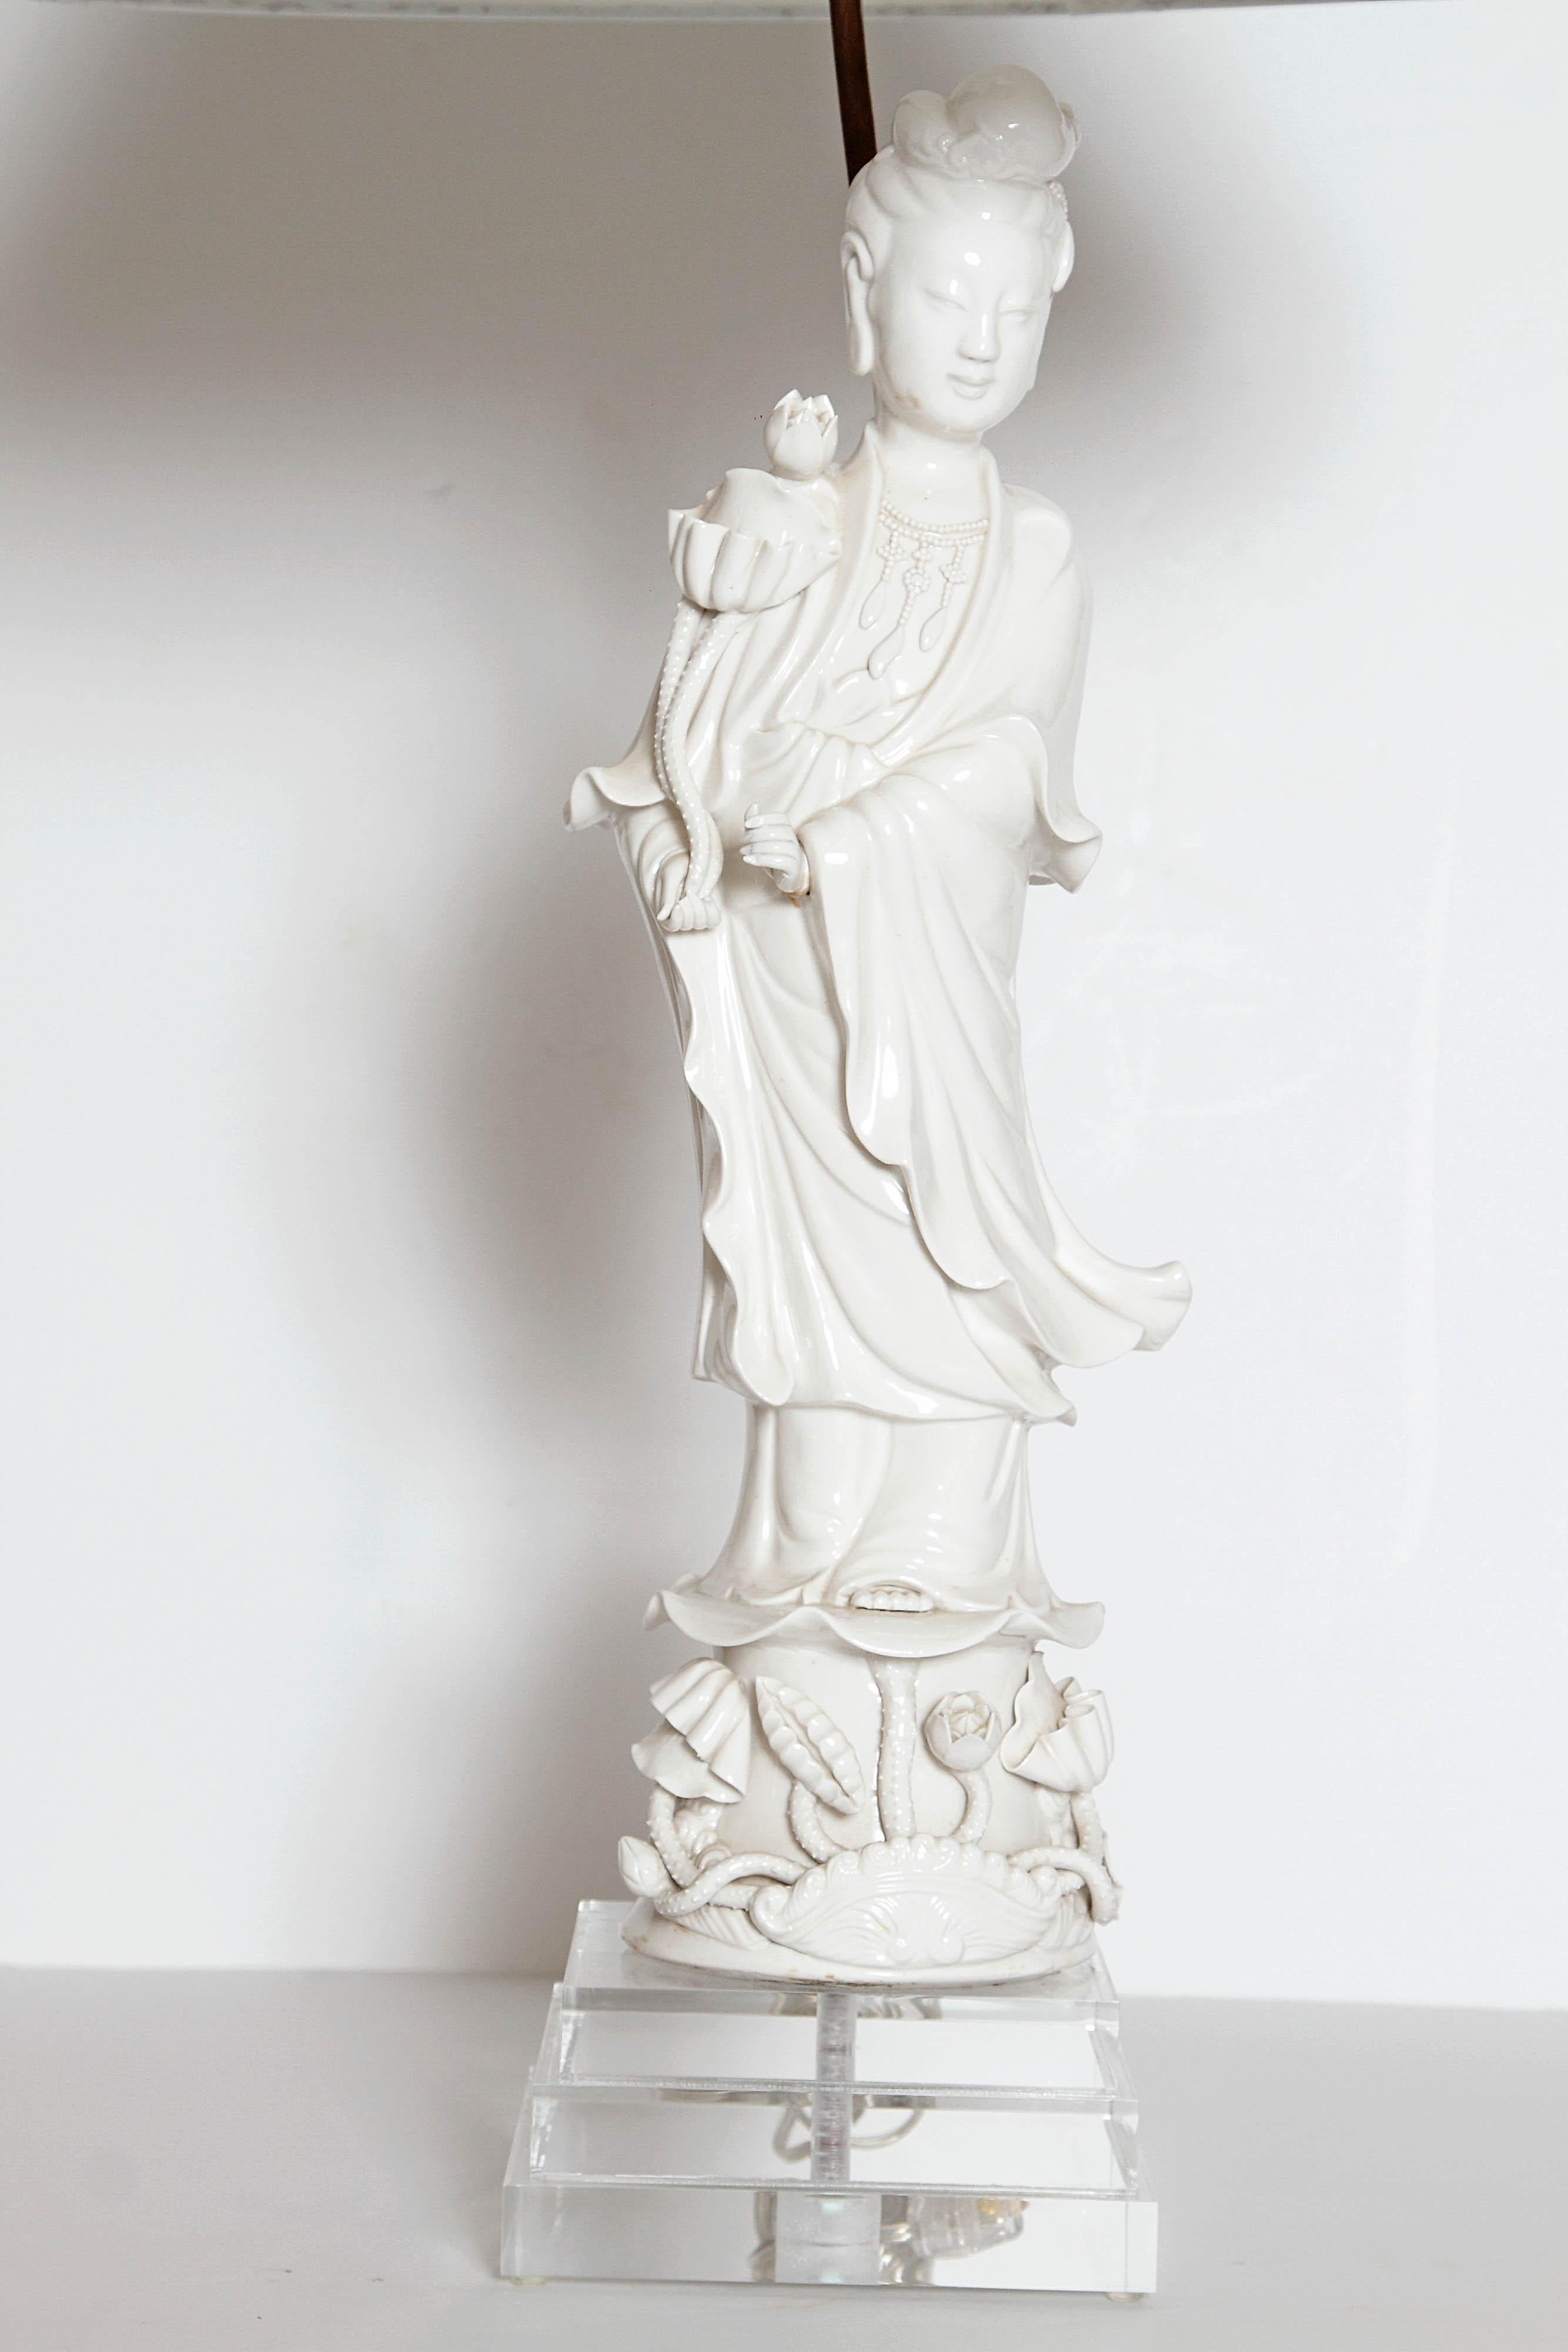 A large Chinese porcelain figure of Guayin with exquisite fine detail. The deity is depicted standing wearing flowing robes, holding a lotus flower in one hand standing on an embellished pedestal base consisting of a floating lotus lead above buds